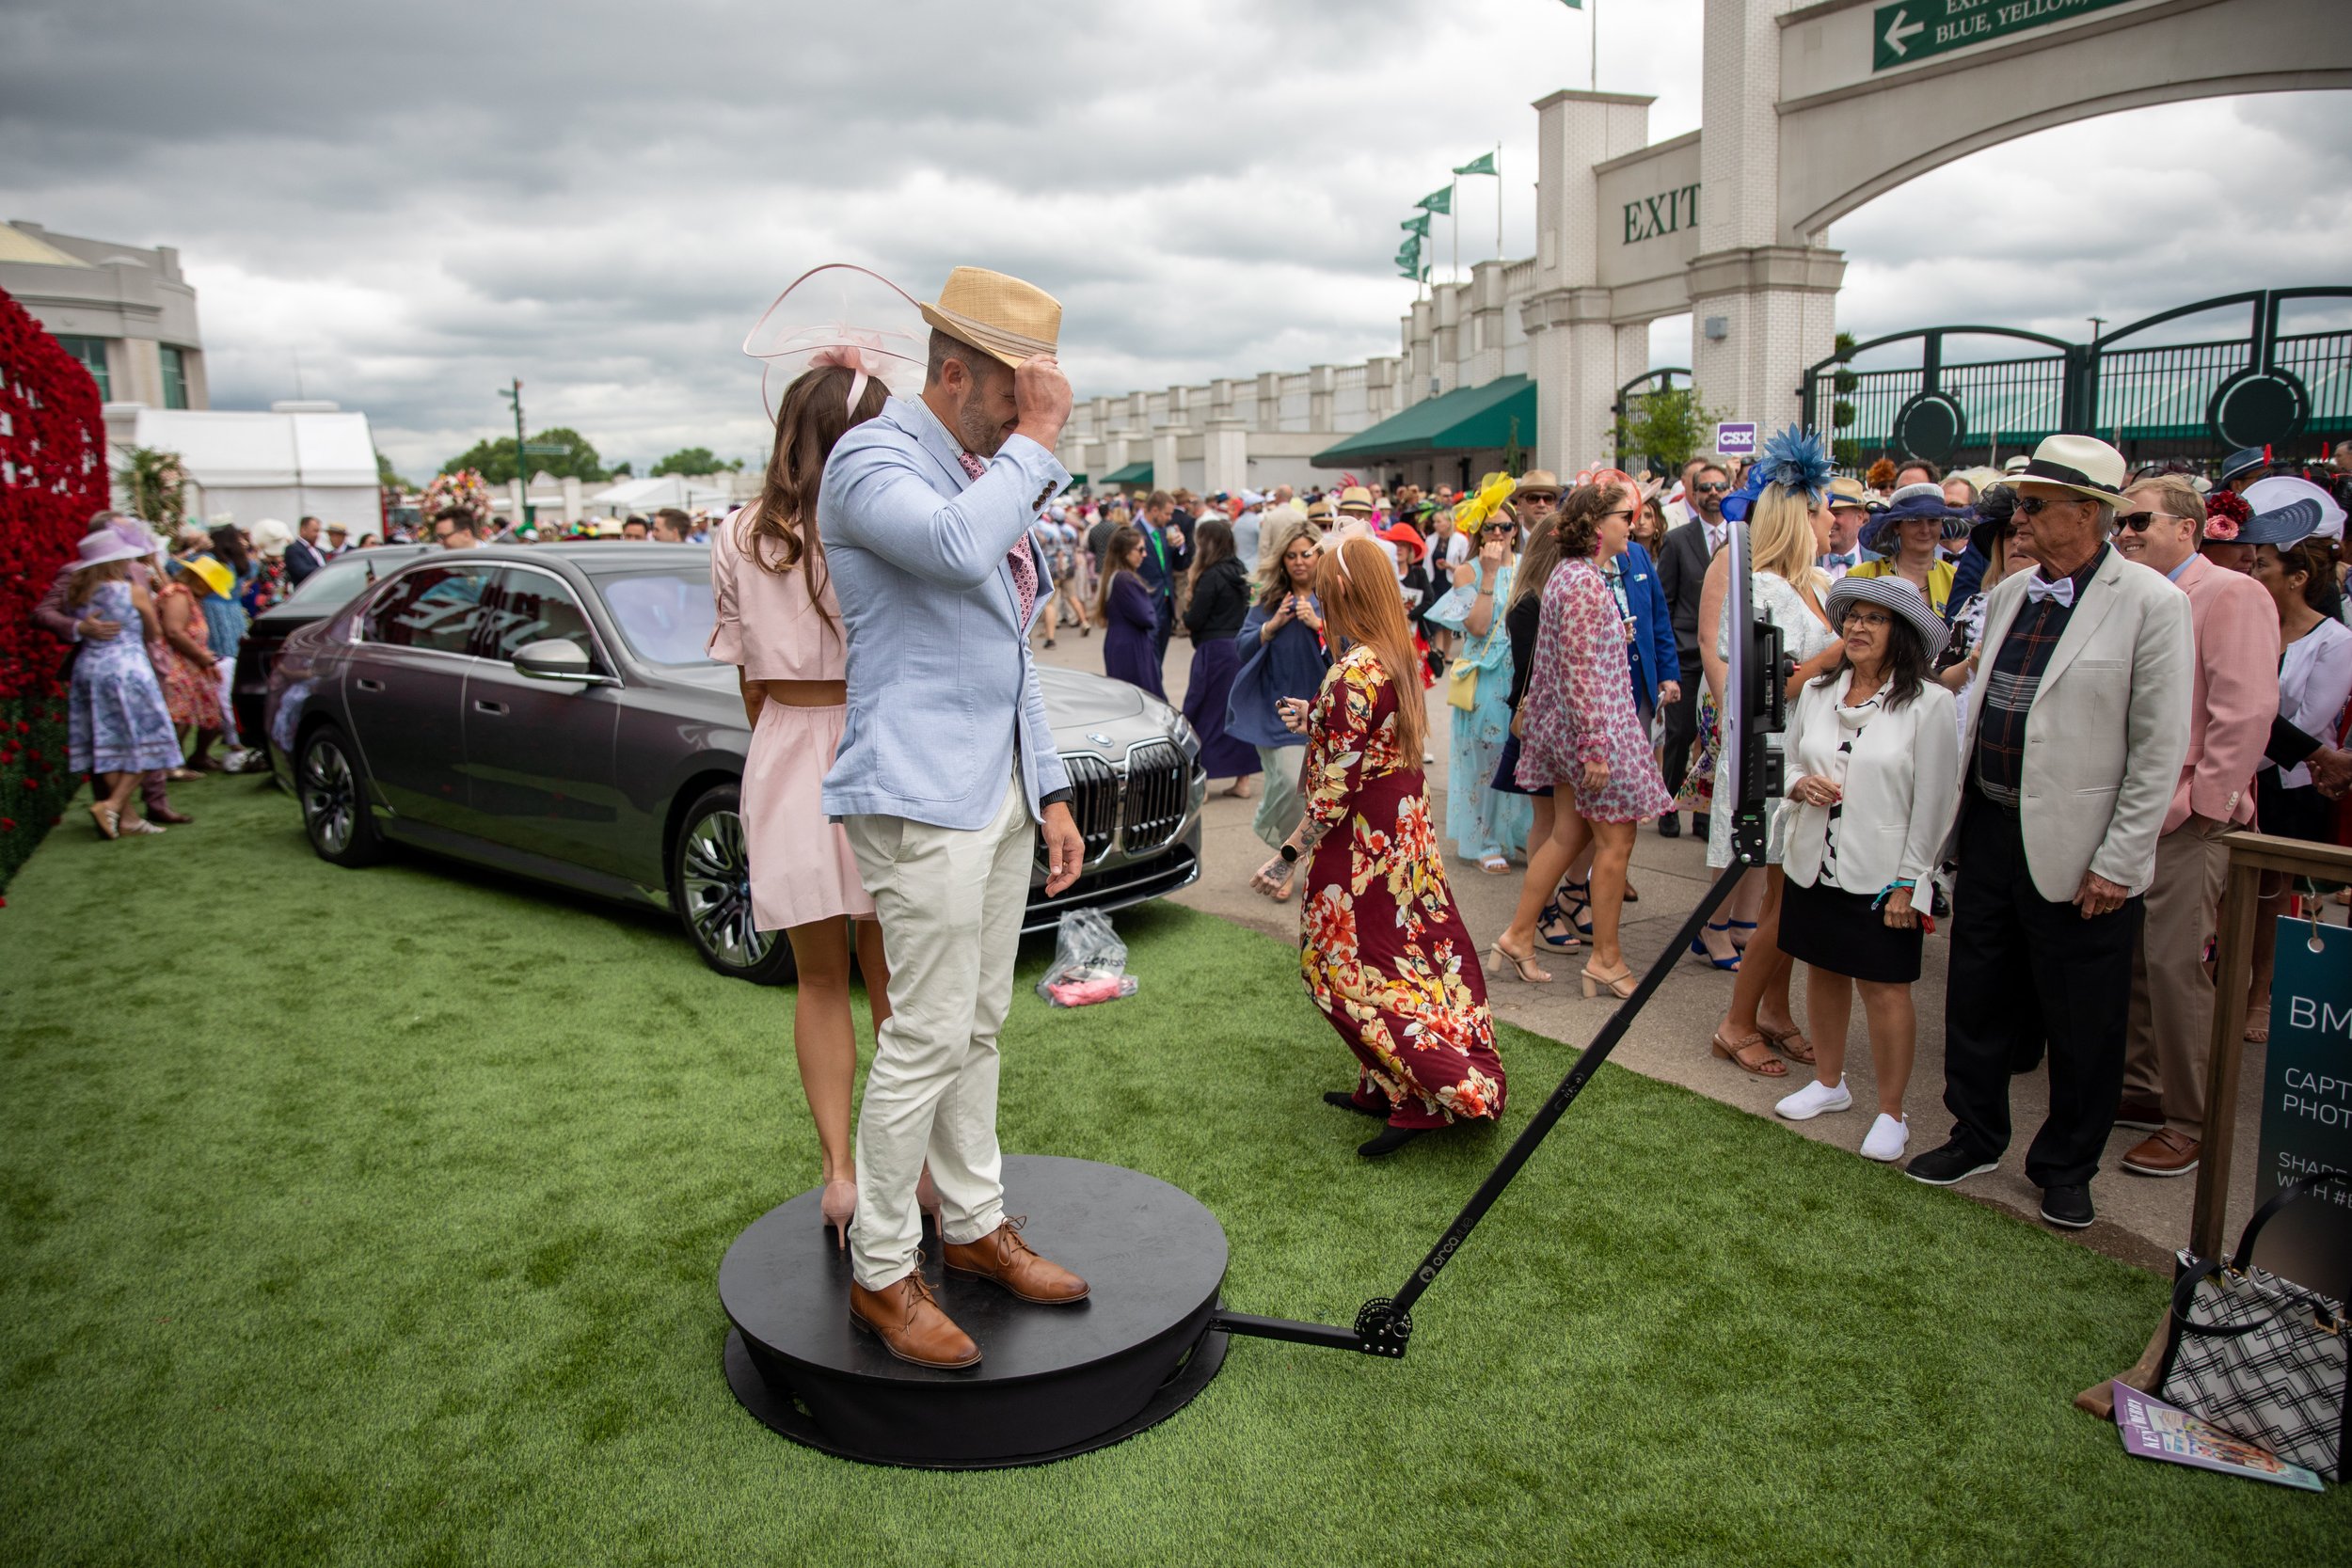 Hannah Shelton Photography - Rivertown Photo Booths 360 Photo Booth with BMW at Kentucky Derby 2022-16.jpg